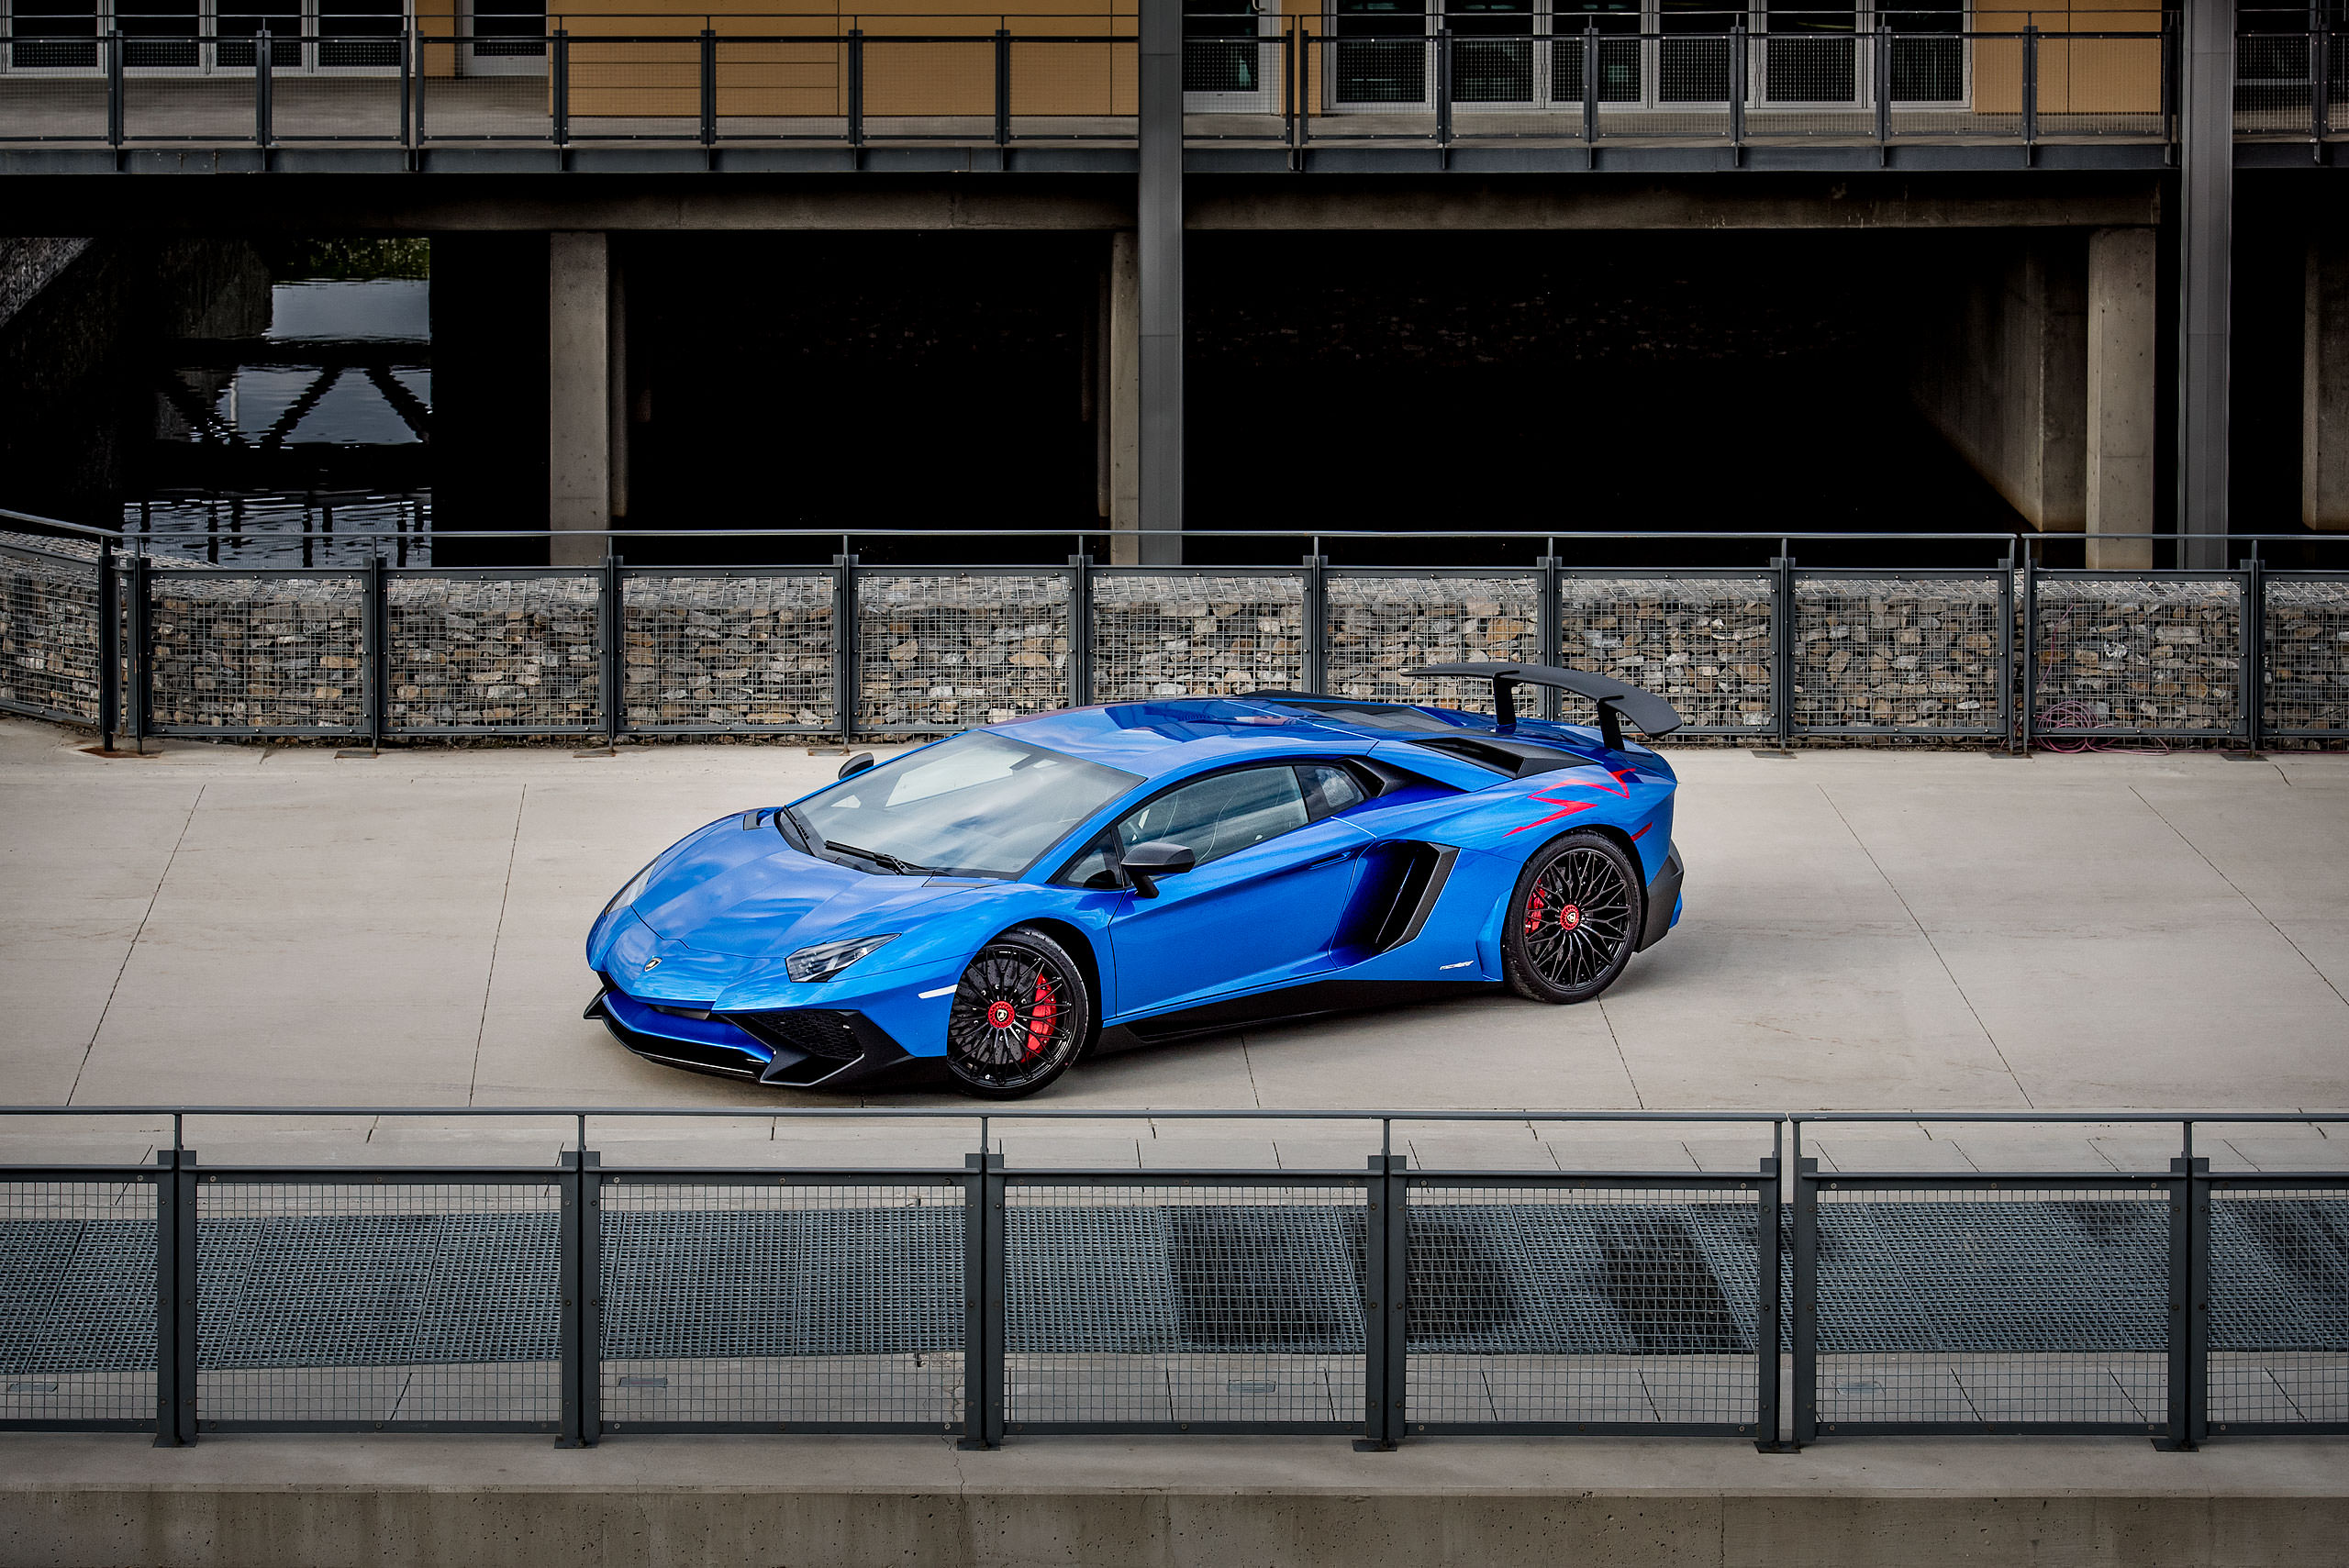 metallic blue Lamborghini aventador with the doors open parked on a road